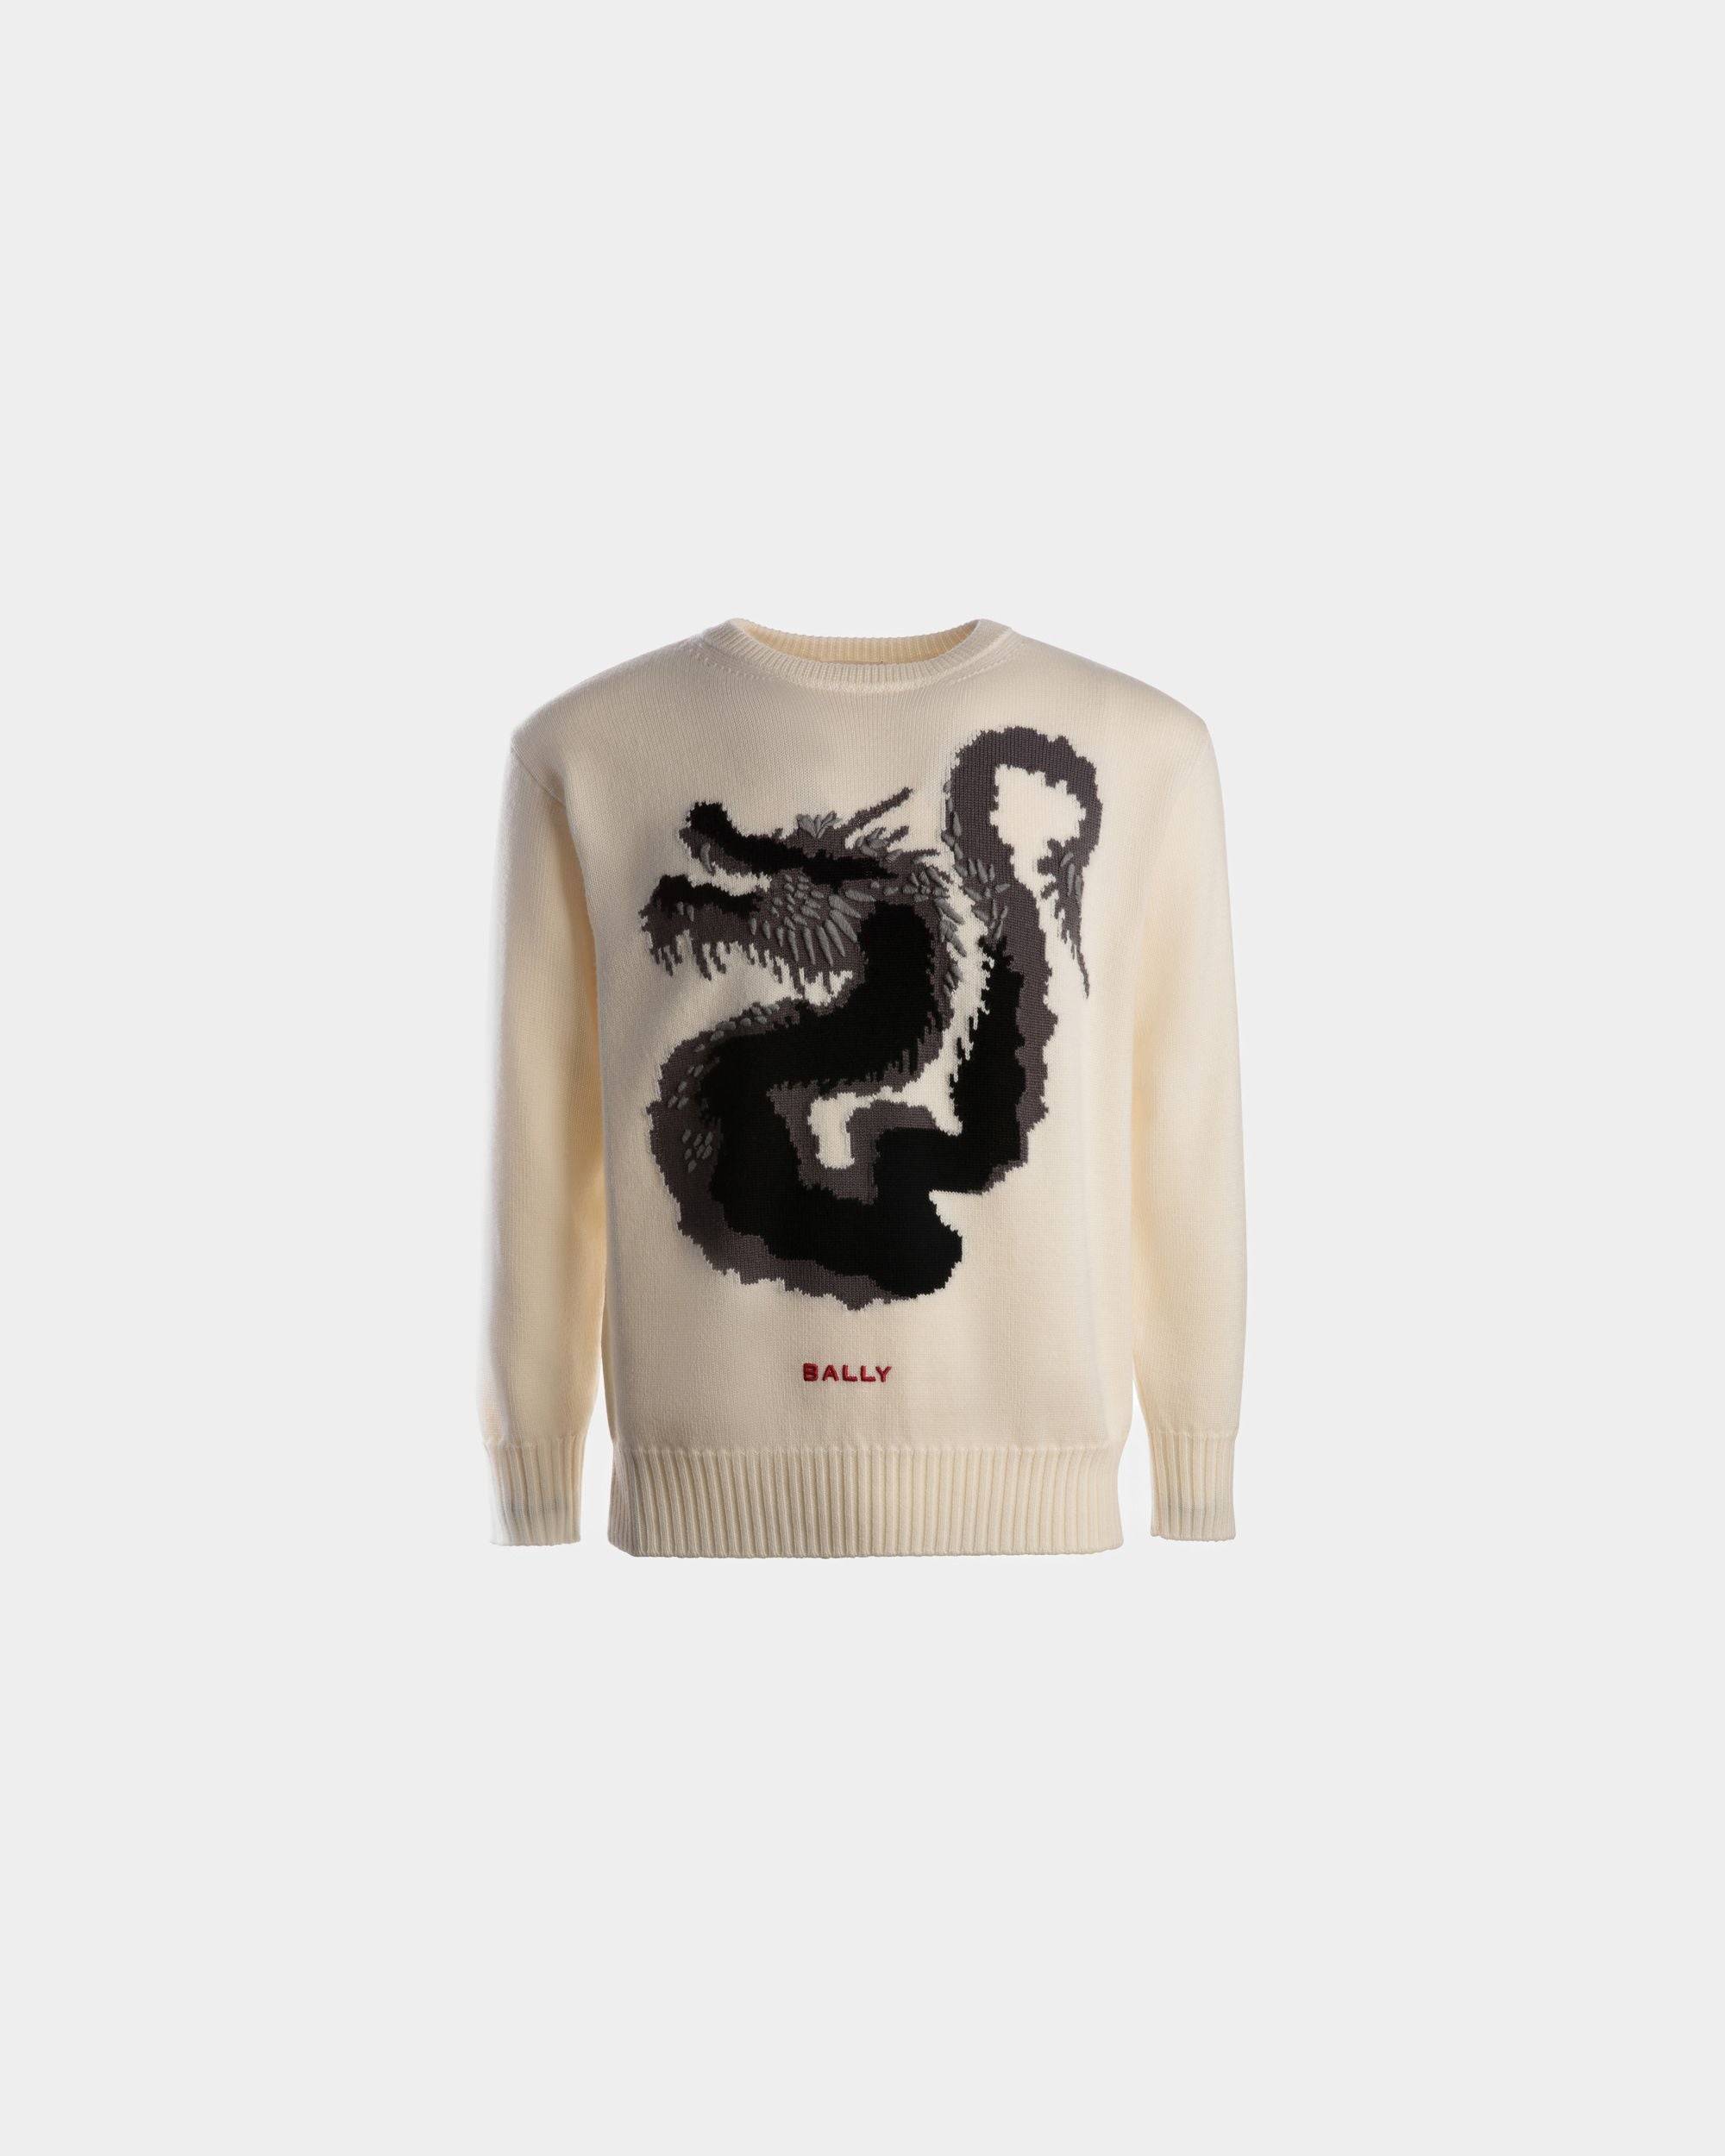 Men's Sweater in White Wool | Bally | Still Life Front